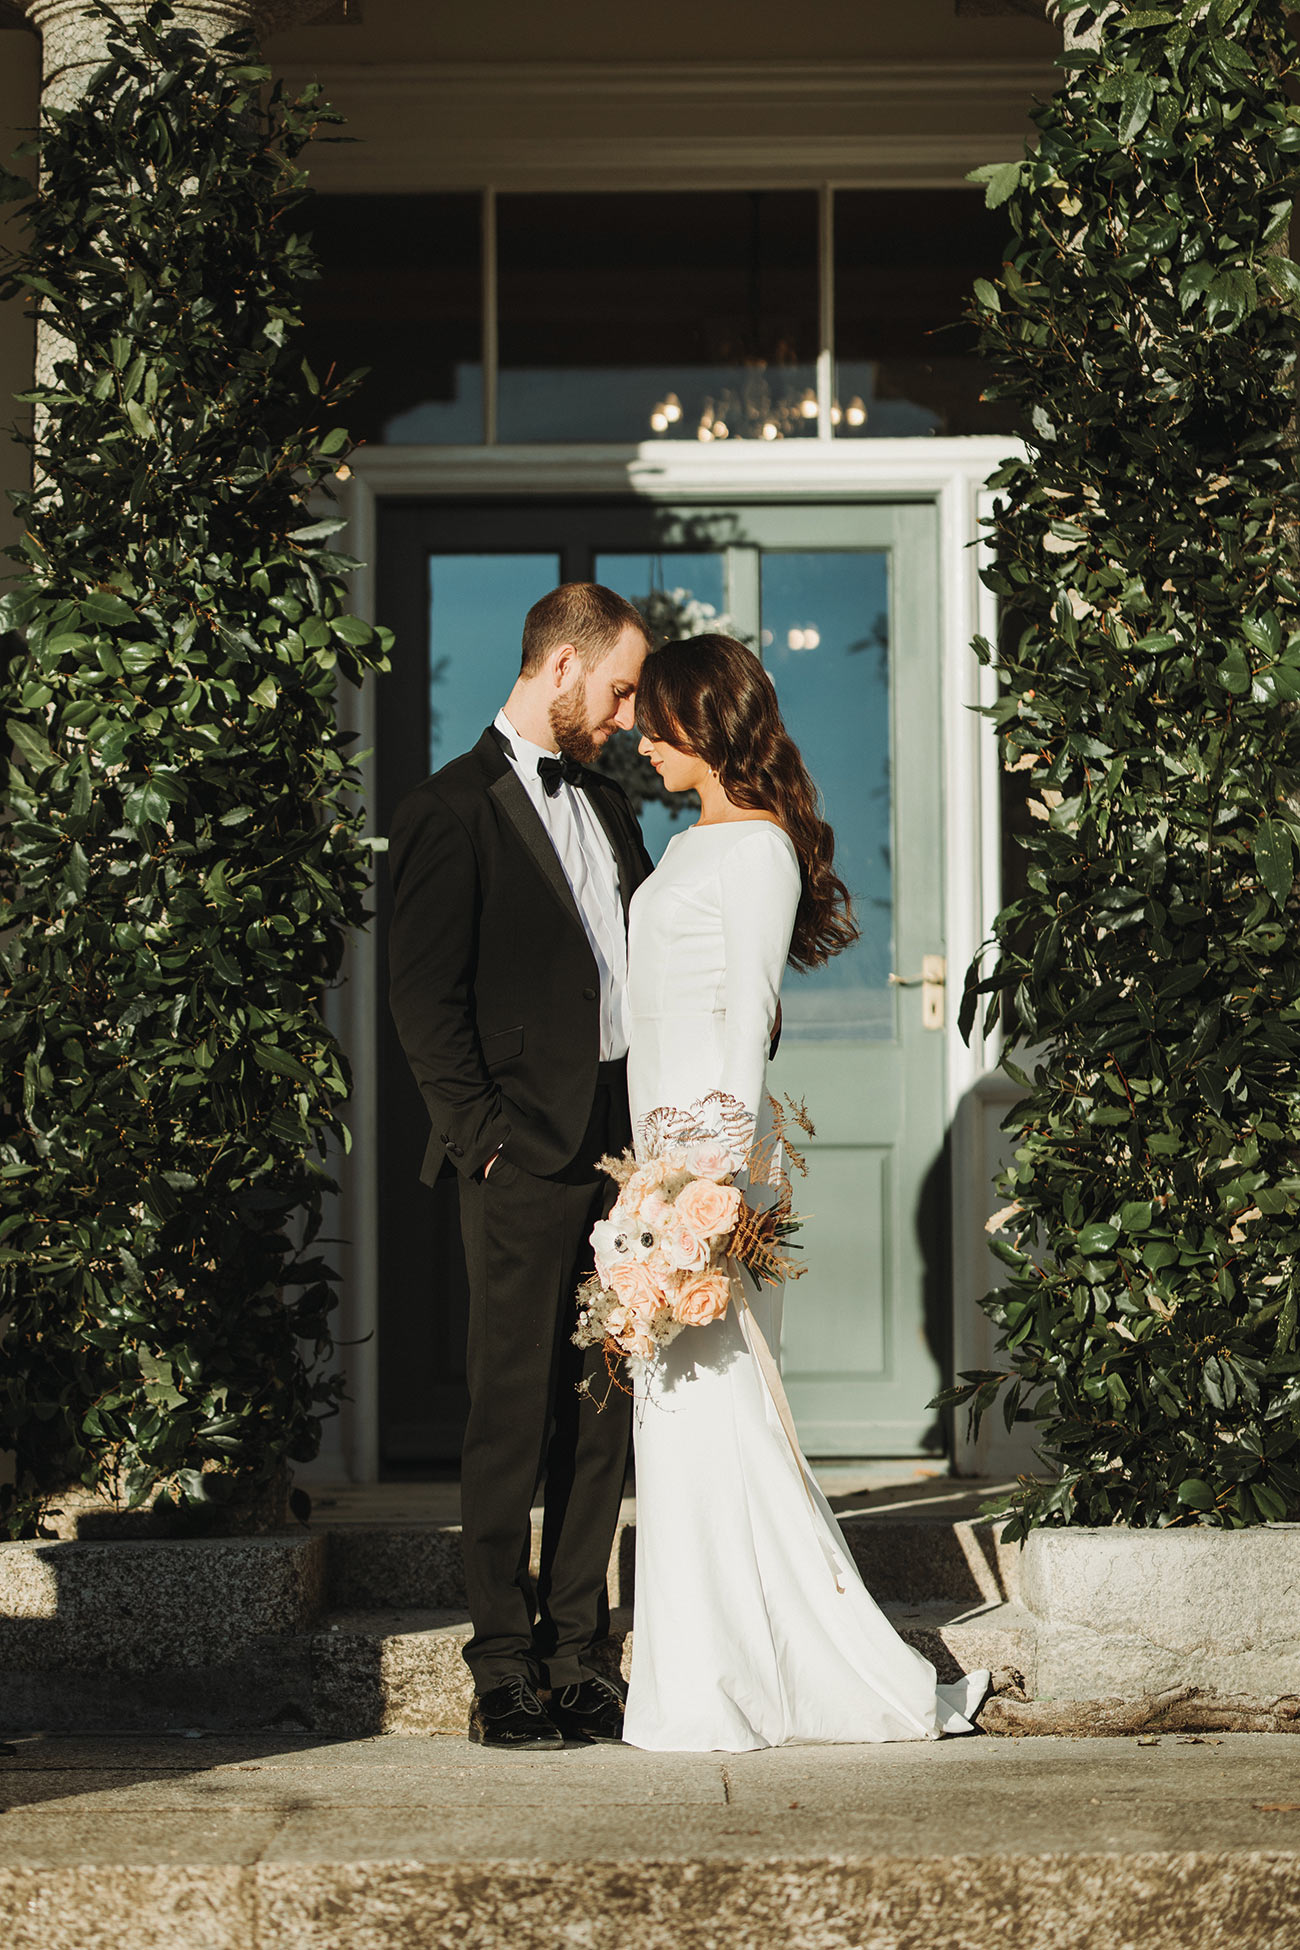 Polstrong Manor Wedding Styling Timeless Glamour Romantic Wed Magazine6